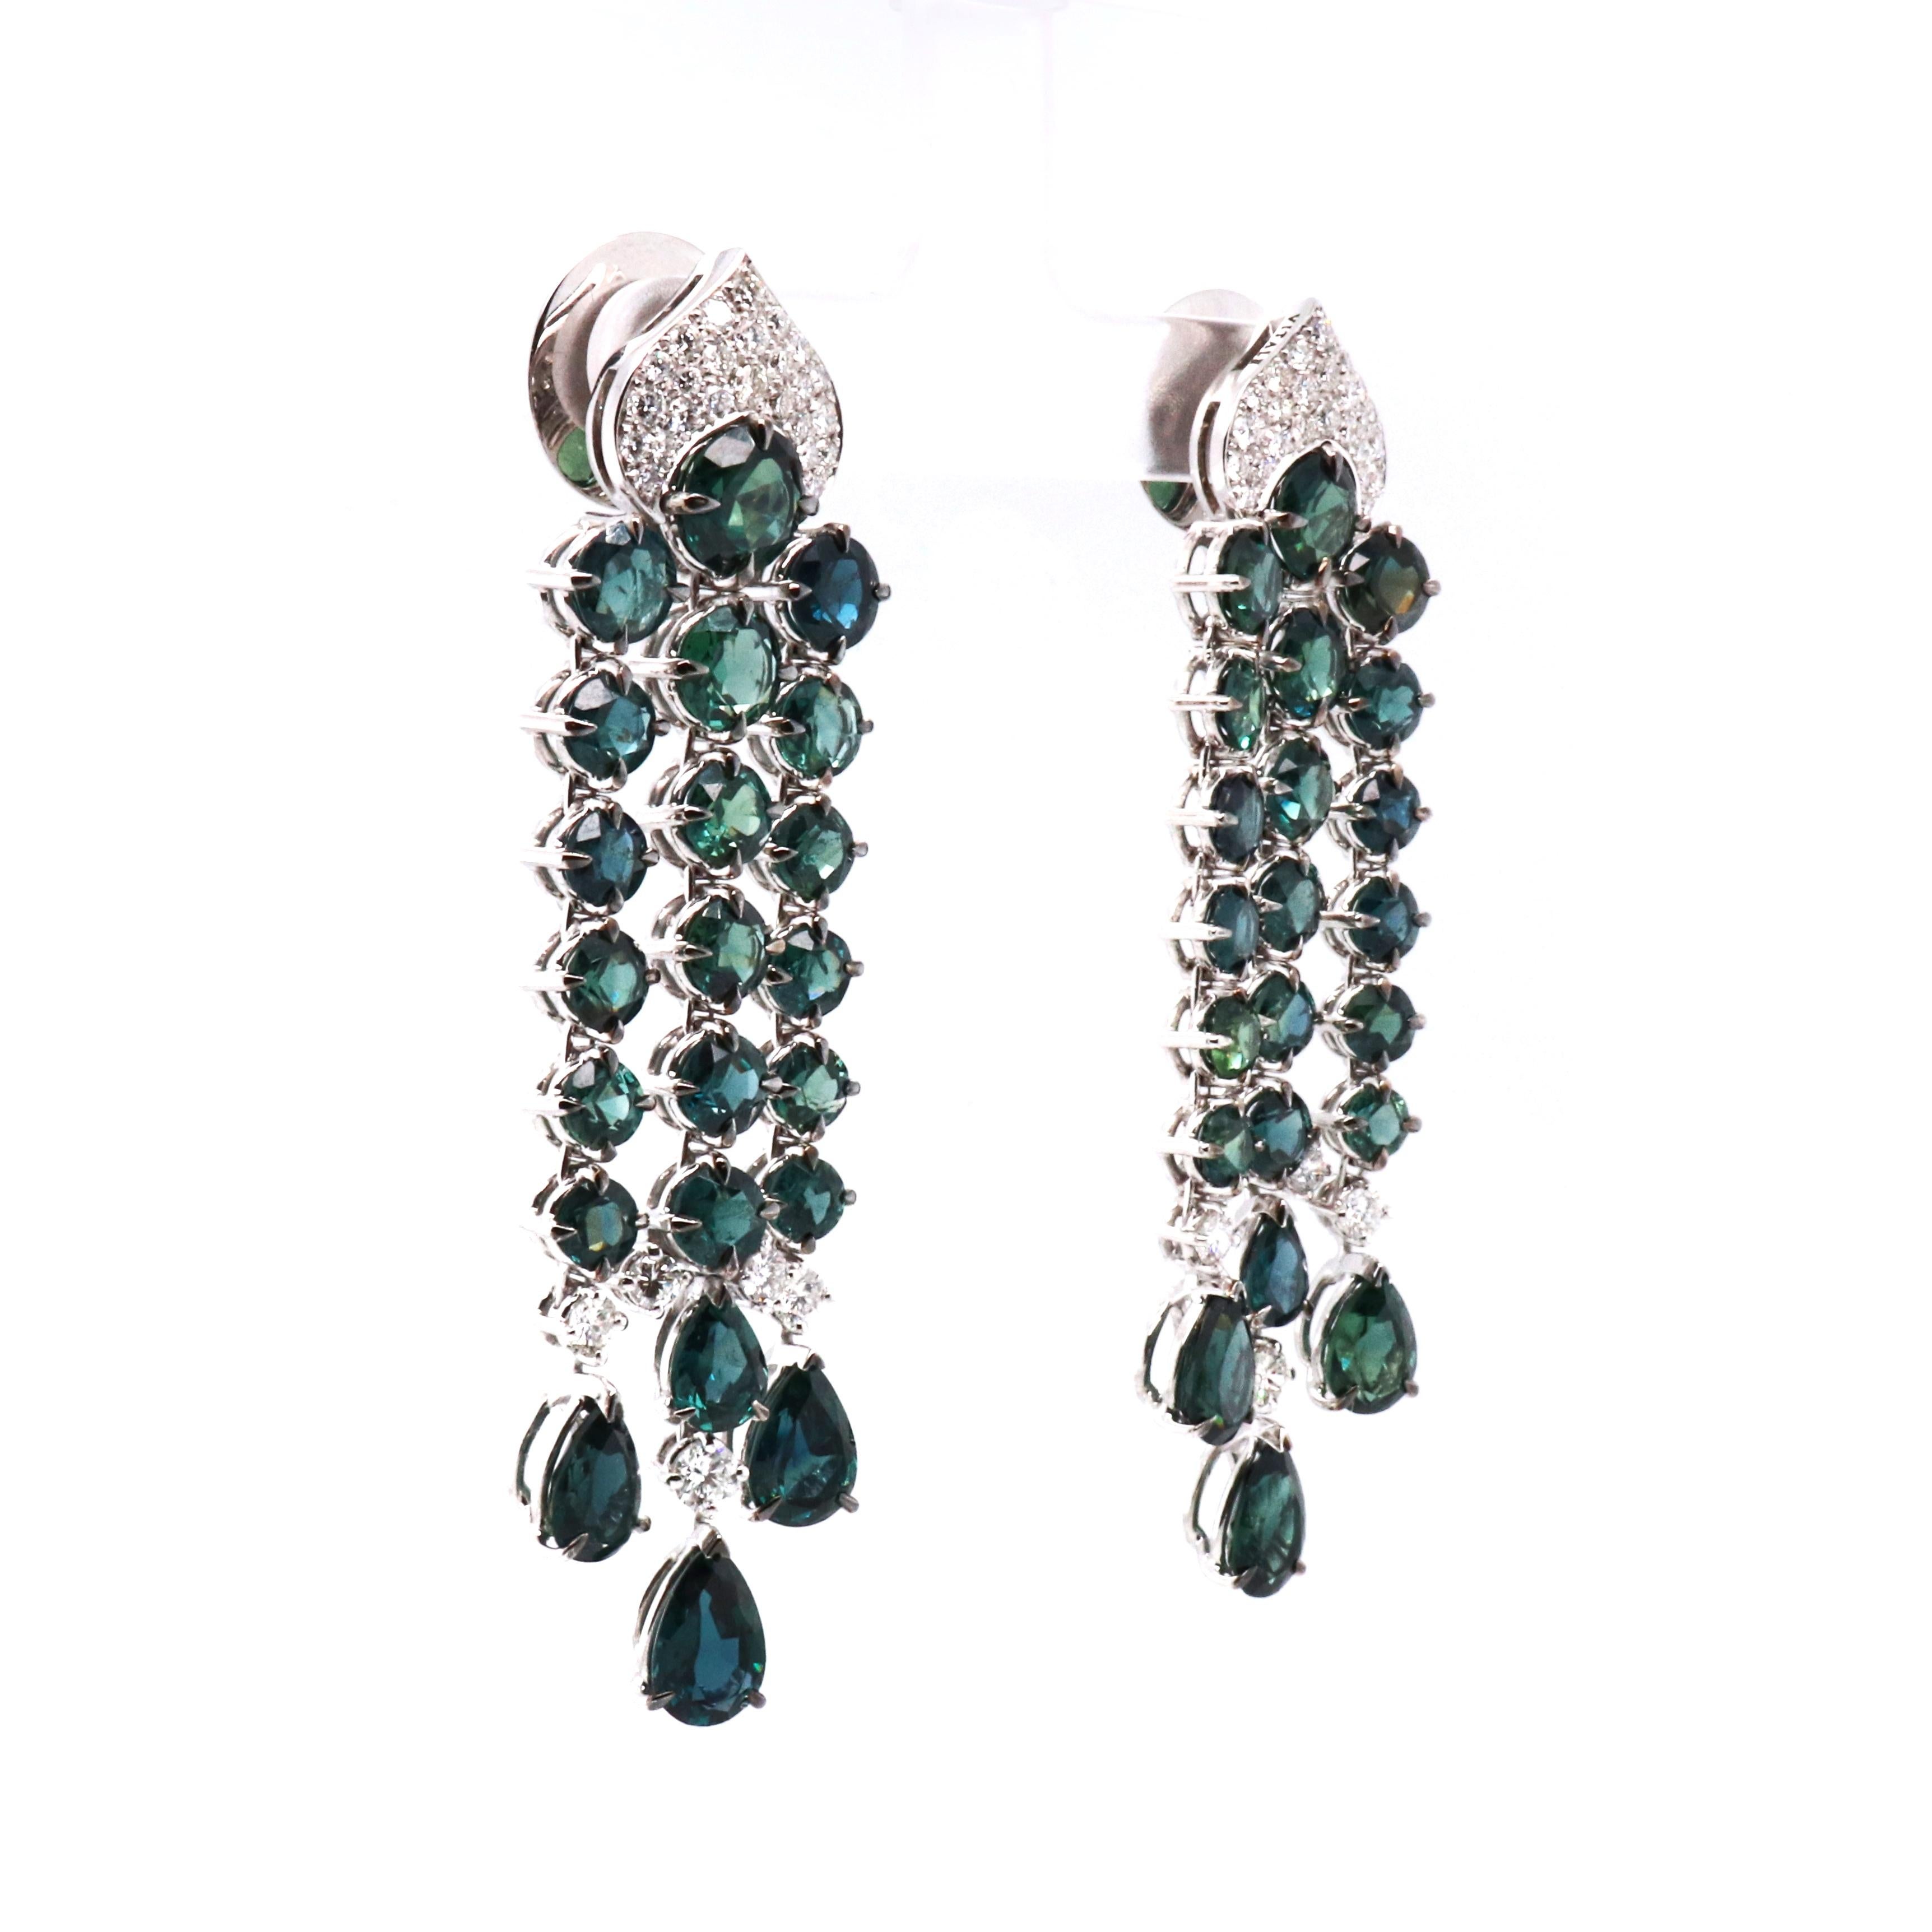 These 18K white gold chandelier earrings are from Divine collection. These chandelier earrings are created with natural white diamonds 1.41 Carat and round and pear shape natural greenish blue sapphires in total of 24.44 Carat. They are 6.5 cm long.